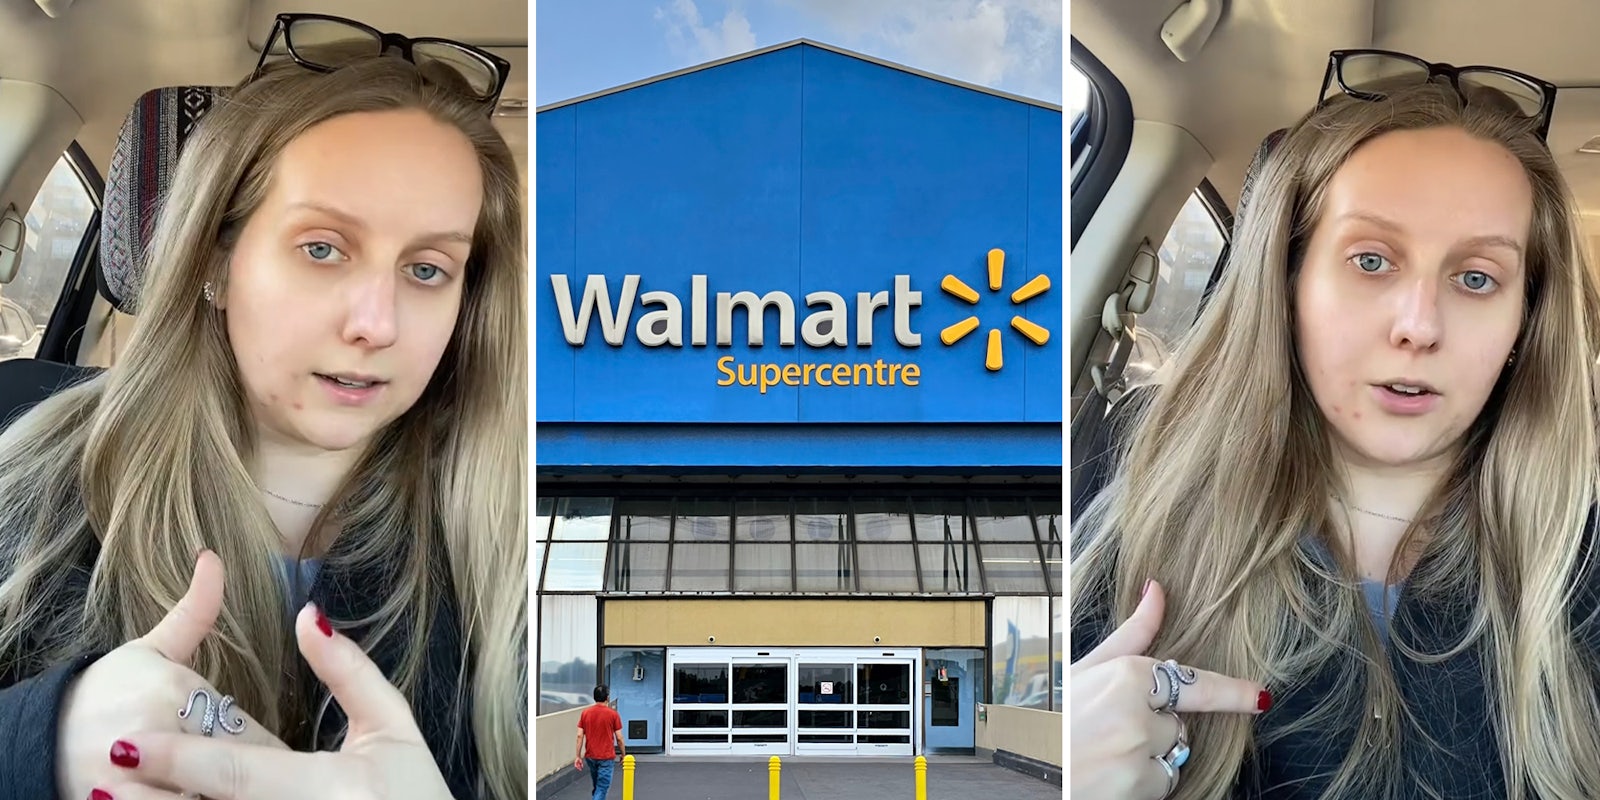 Ex-retail worker blasts ‘corporate’ planted employees doing ‘store walks’ at checkout.